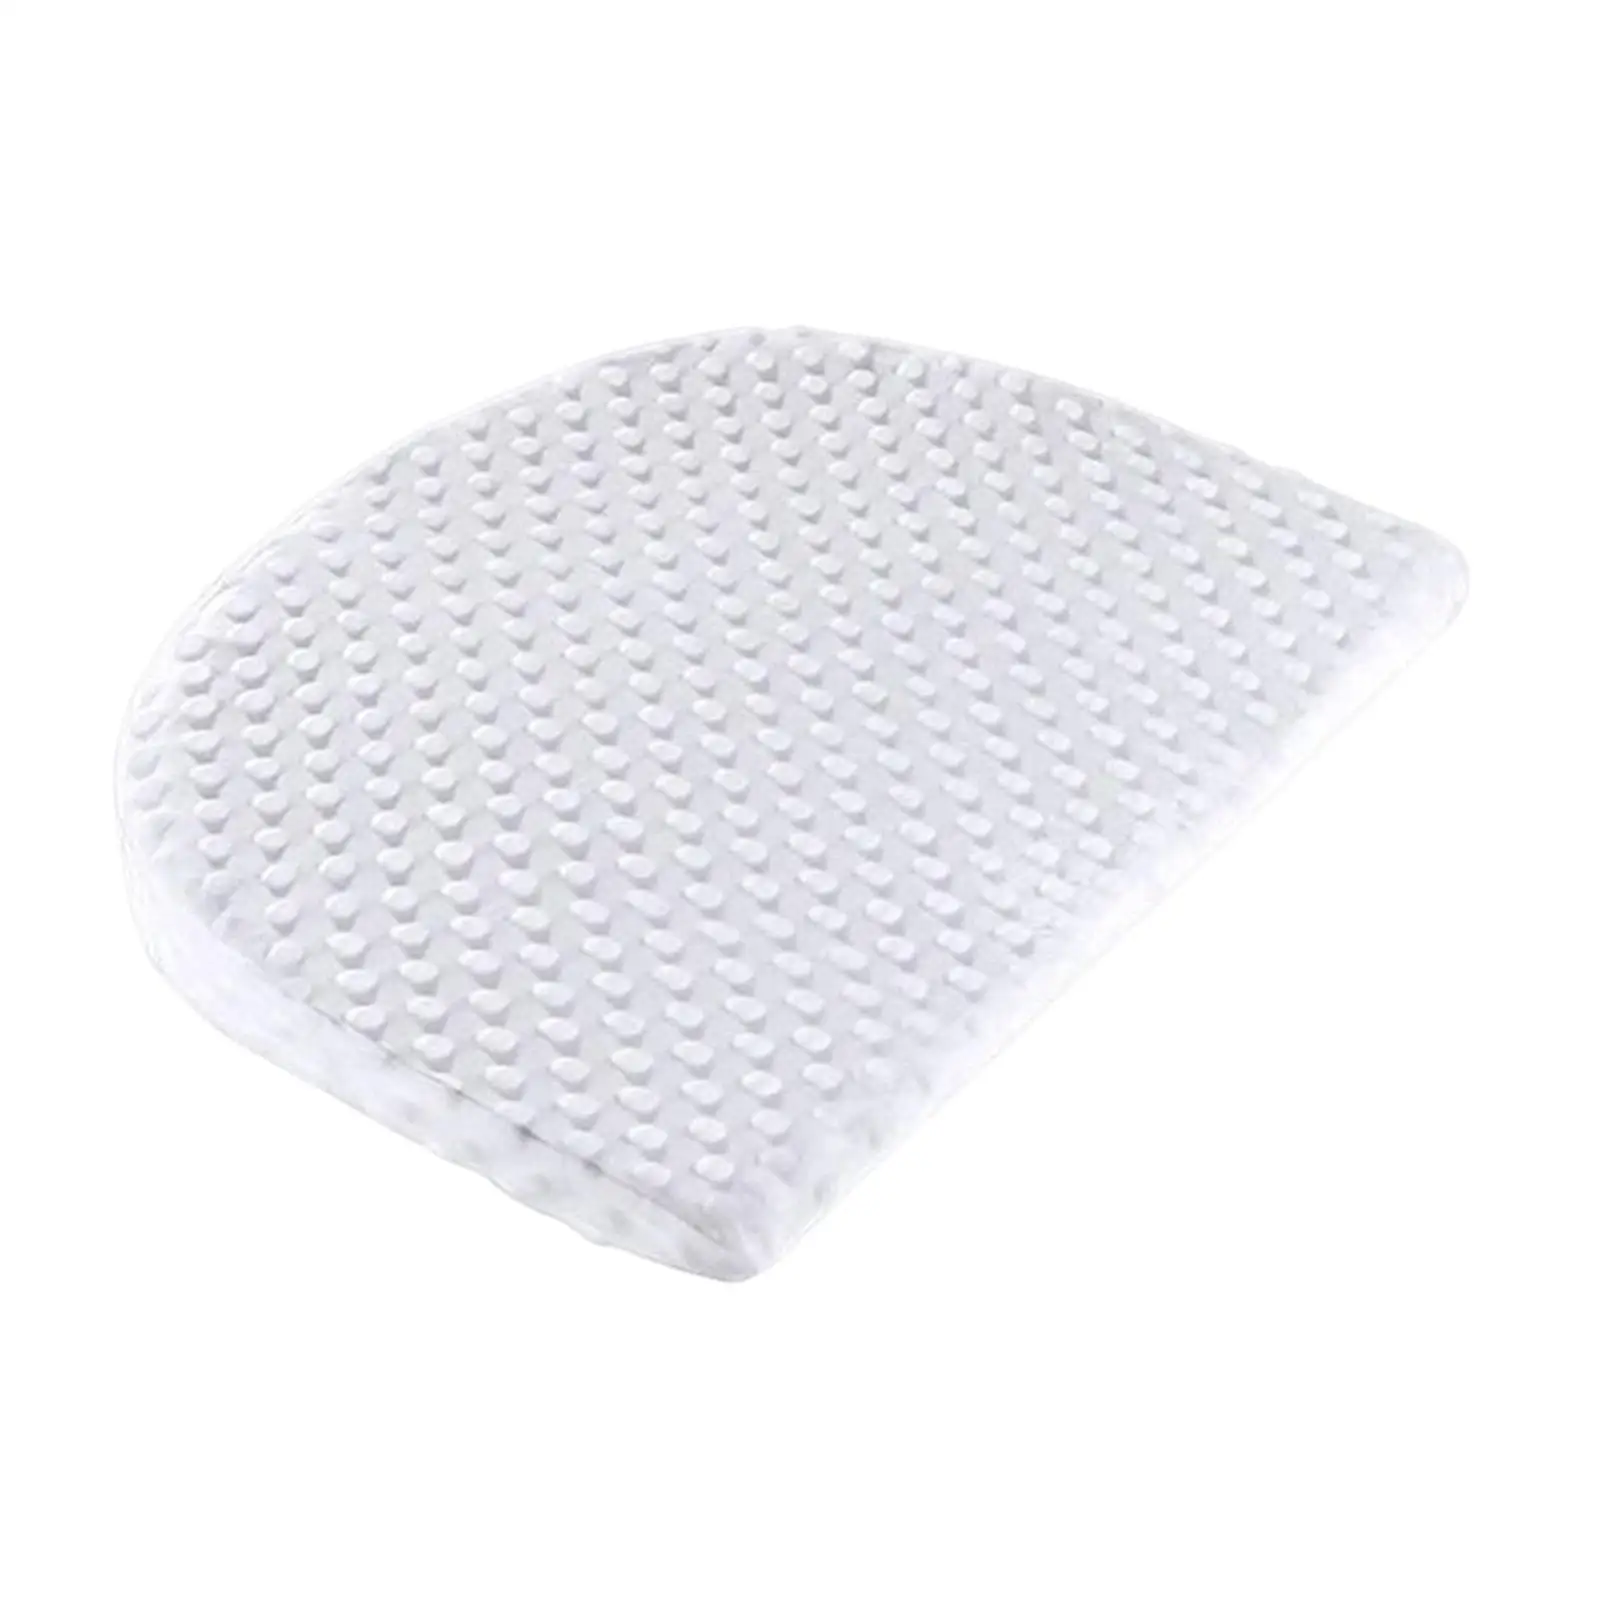 Baby Wedge Pillow Anti Reflux Anti Spit Milk Removable Cover Elevated Support Pillow for Crib Nursing Bed Cot Sleep